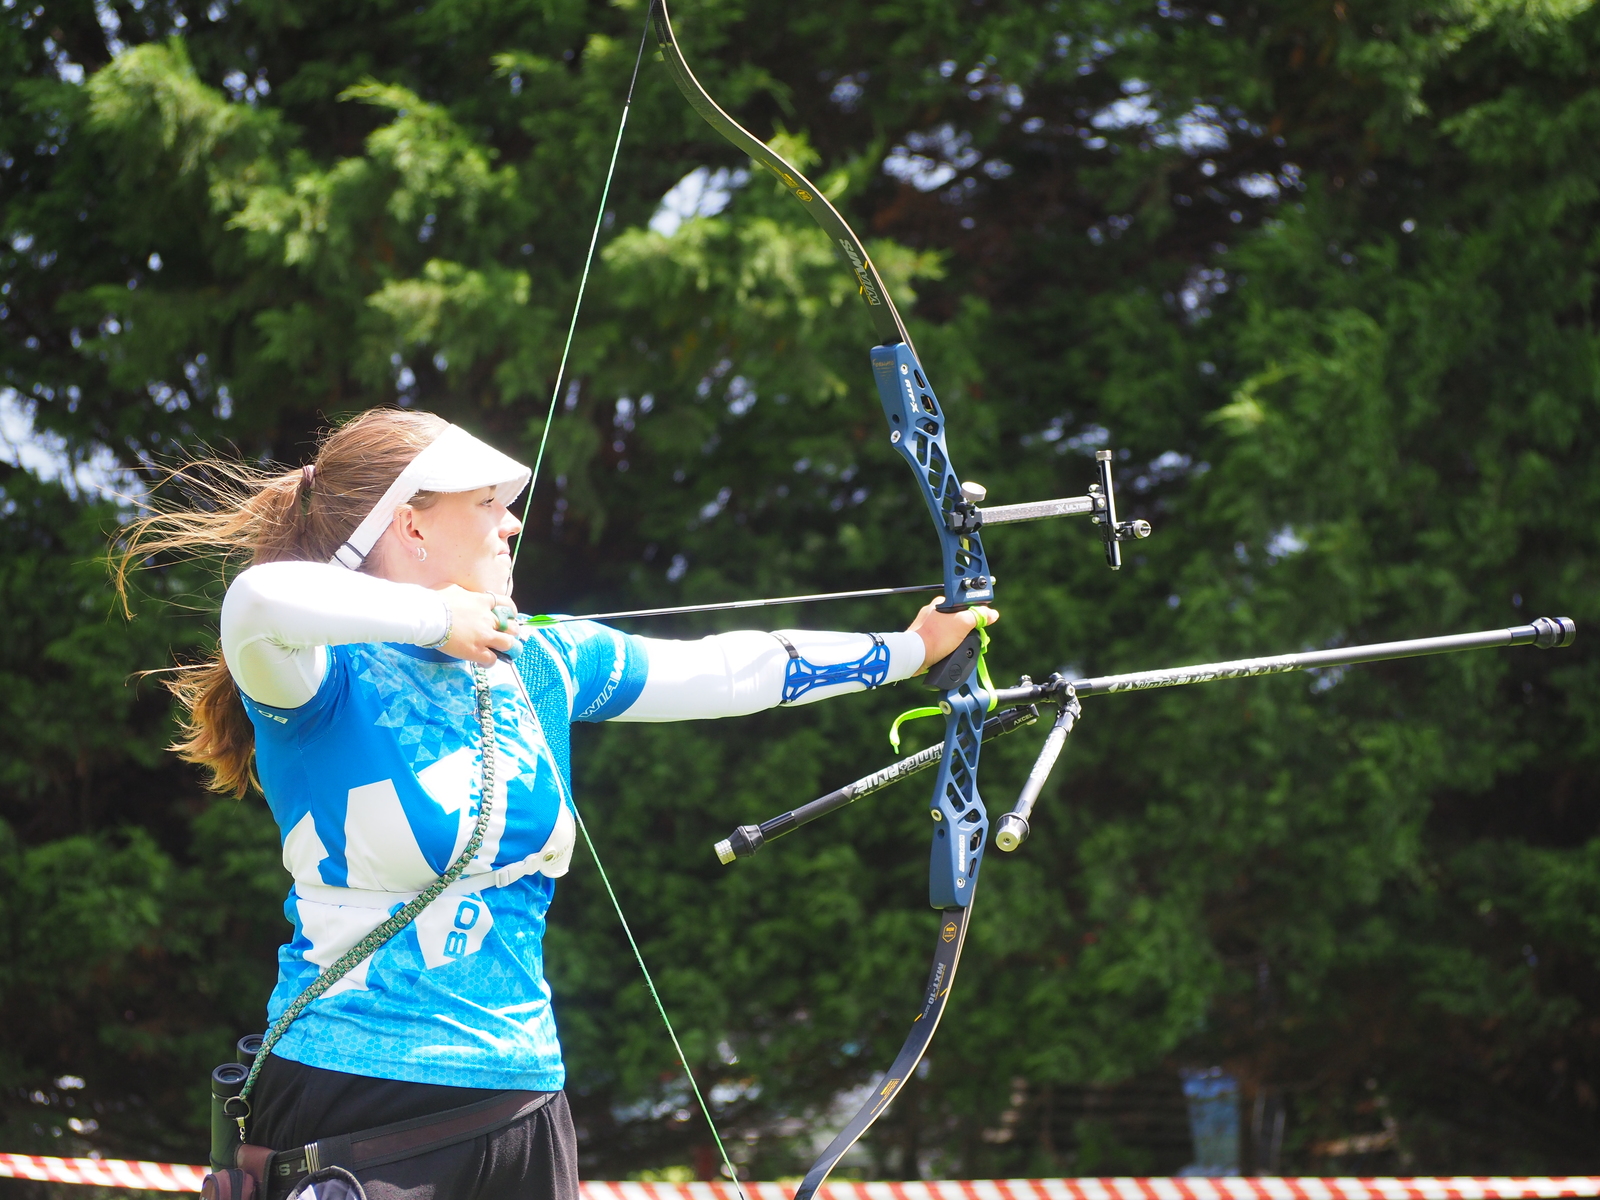 Archers shot in gale force conditions at the National Tour